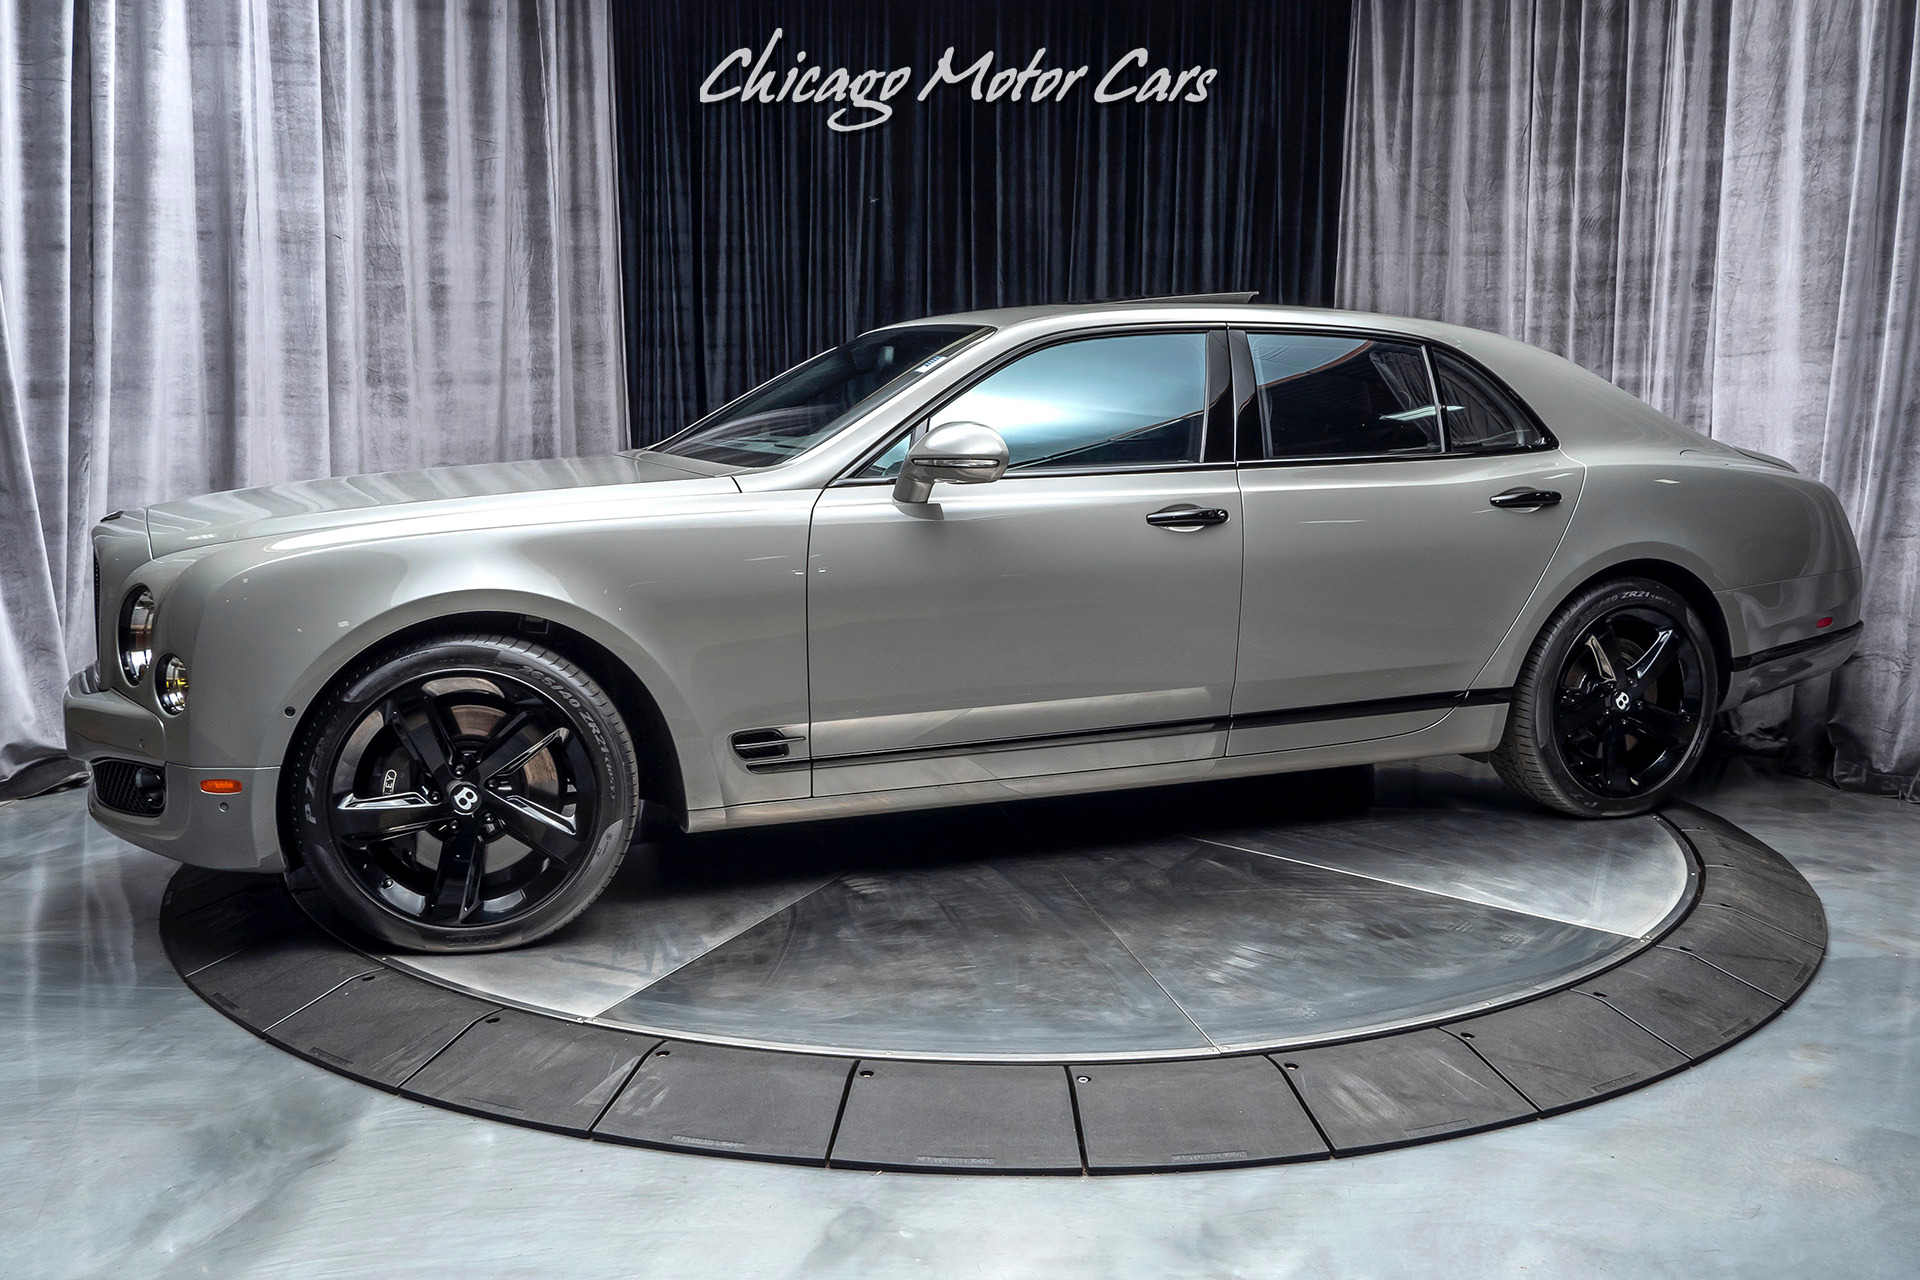 Used 2016 Bentley Mulsanne Speed Sedan MSRP $427k+ LOADED WITH OPTIONS! For  Sale (Special Pricing) | Chicago Motor Cars Stock #16561A